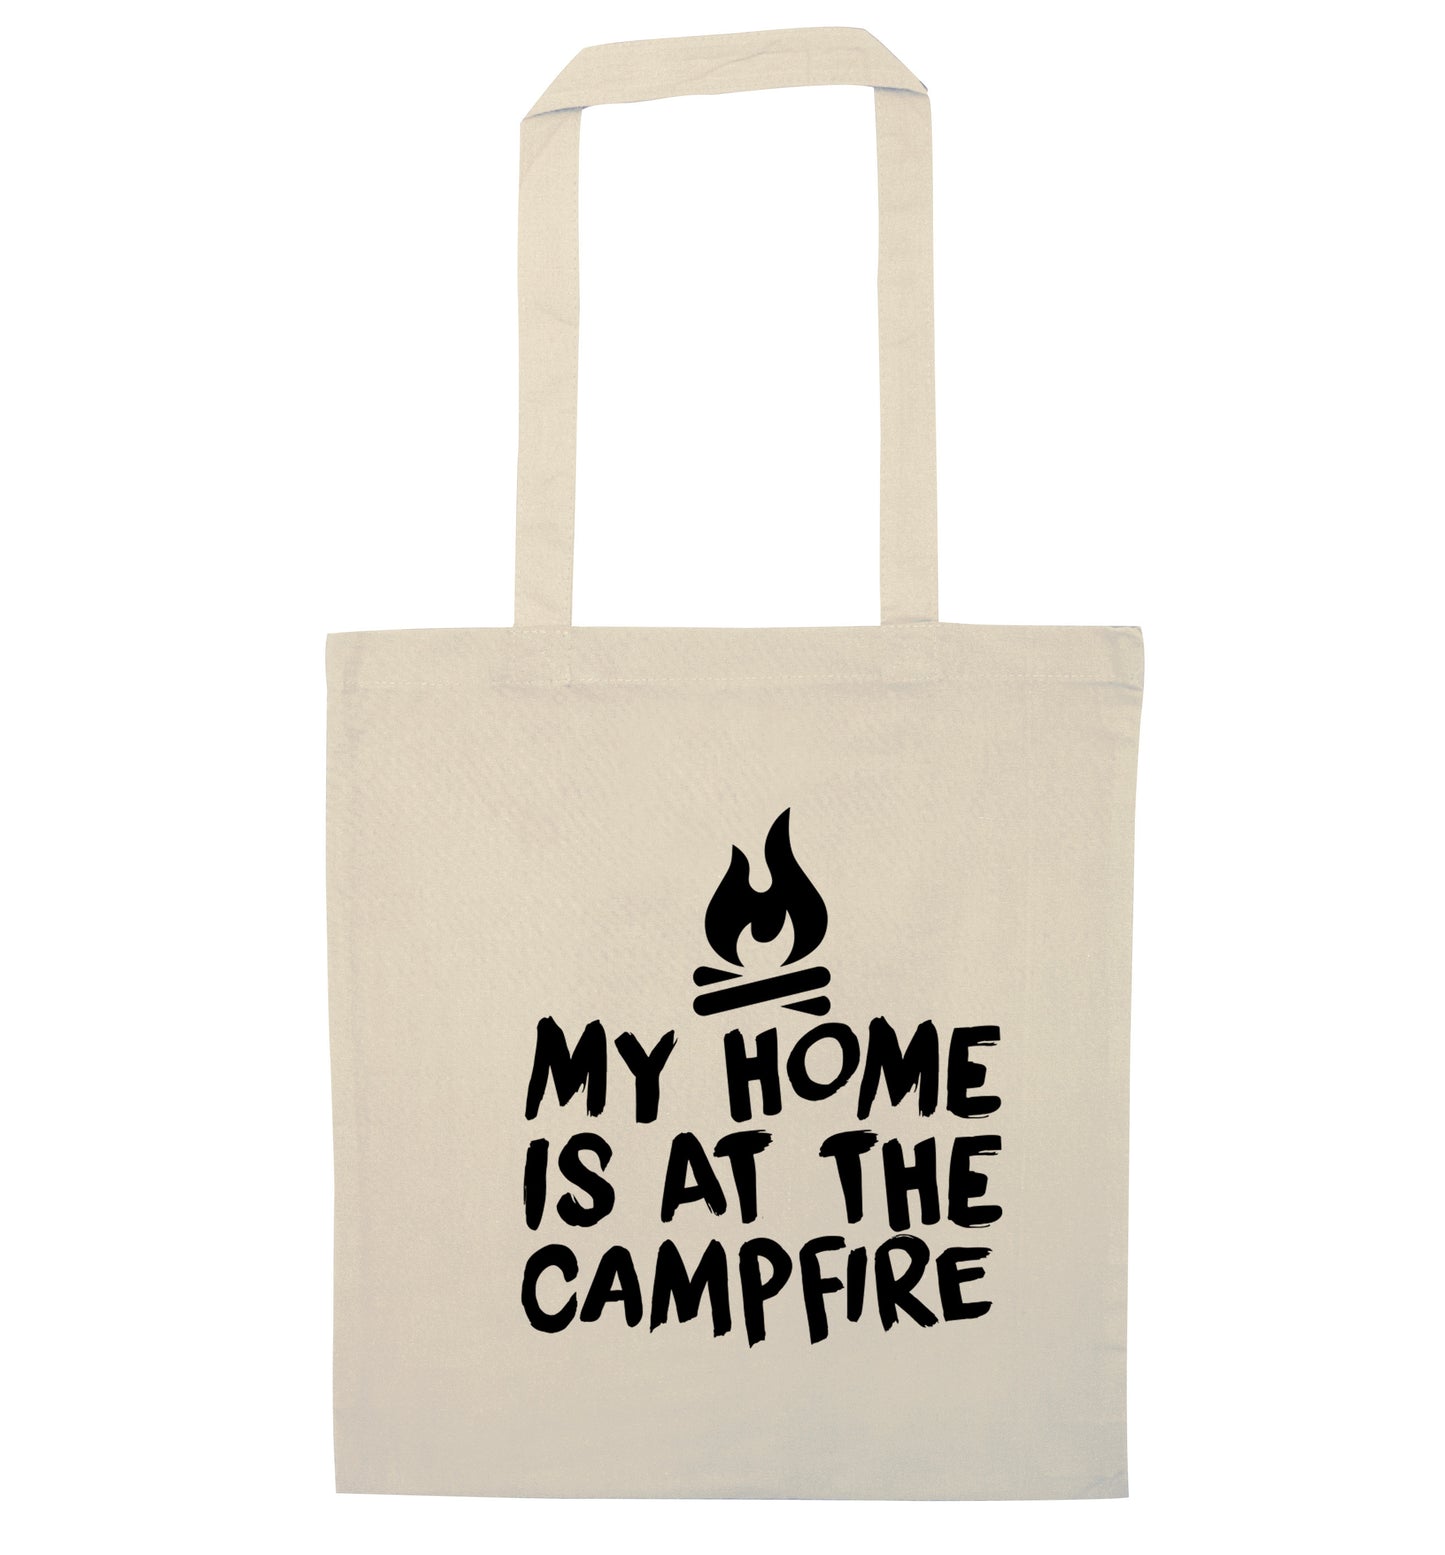 My home is at the campfire natural tote bag